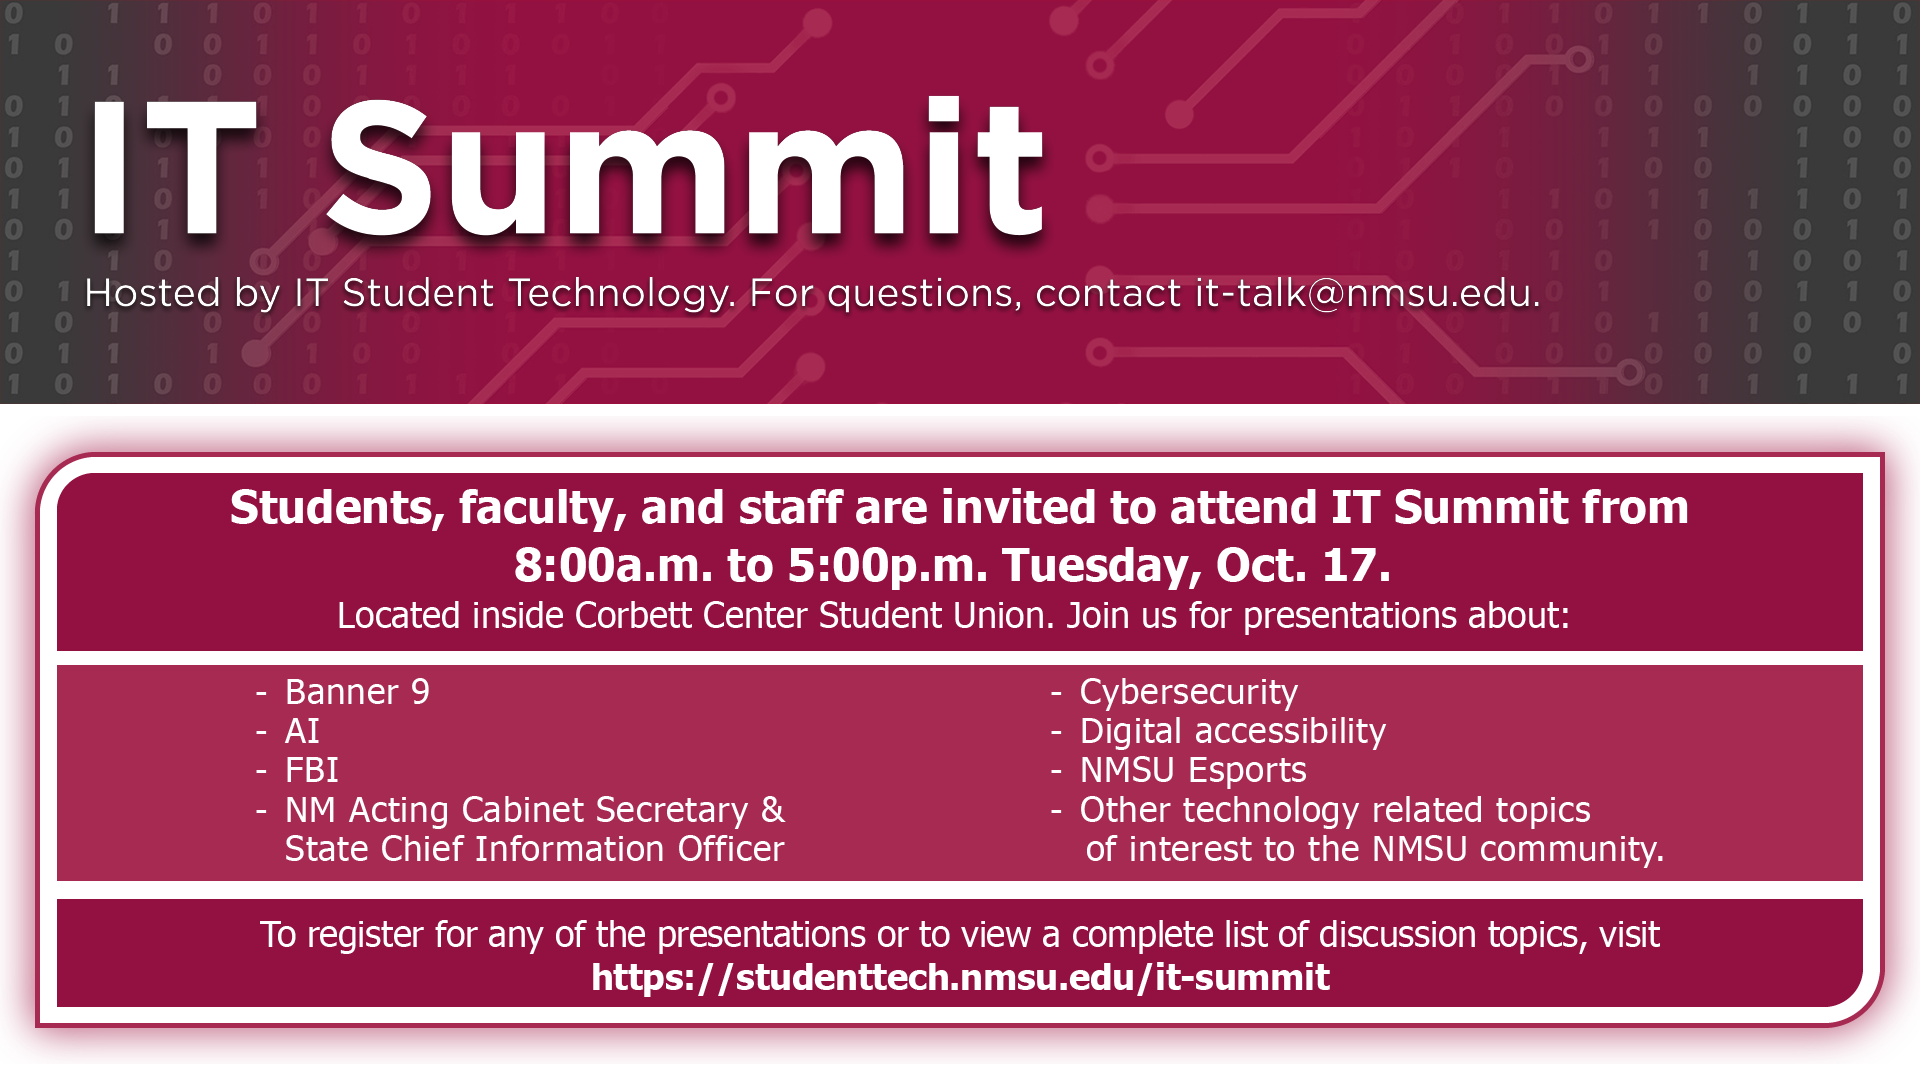 Students, faculty, and staff are invited to attend IT Summit from 8:00 am to 5:00 pm Tuesday October 17th. To register or view discussions topics, visit studenttech.nmsu.edu/it-summit.